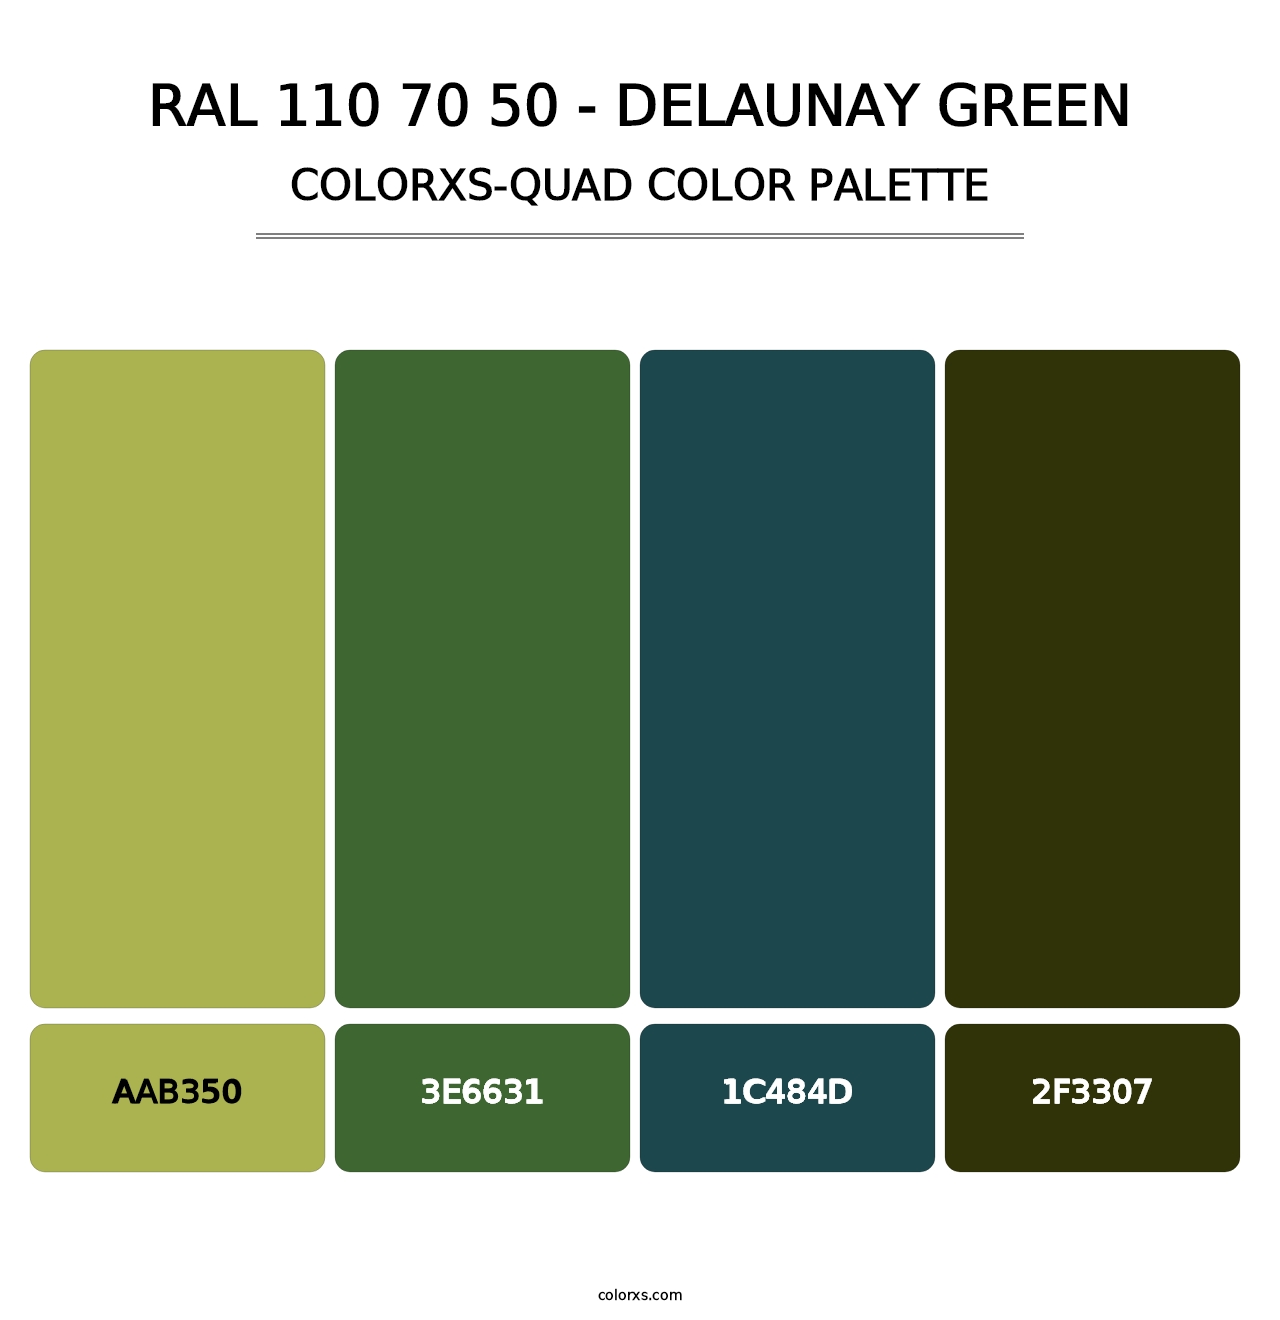 RAL 110 70 50 - Delaunay Green - Colorxs Quad Palette